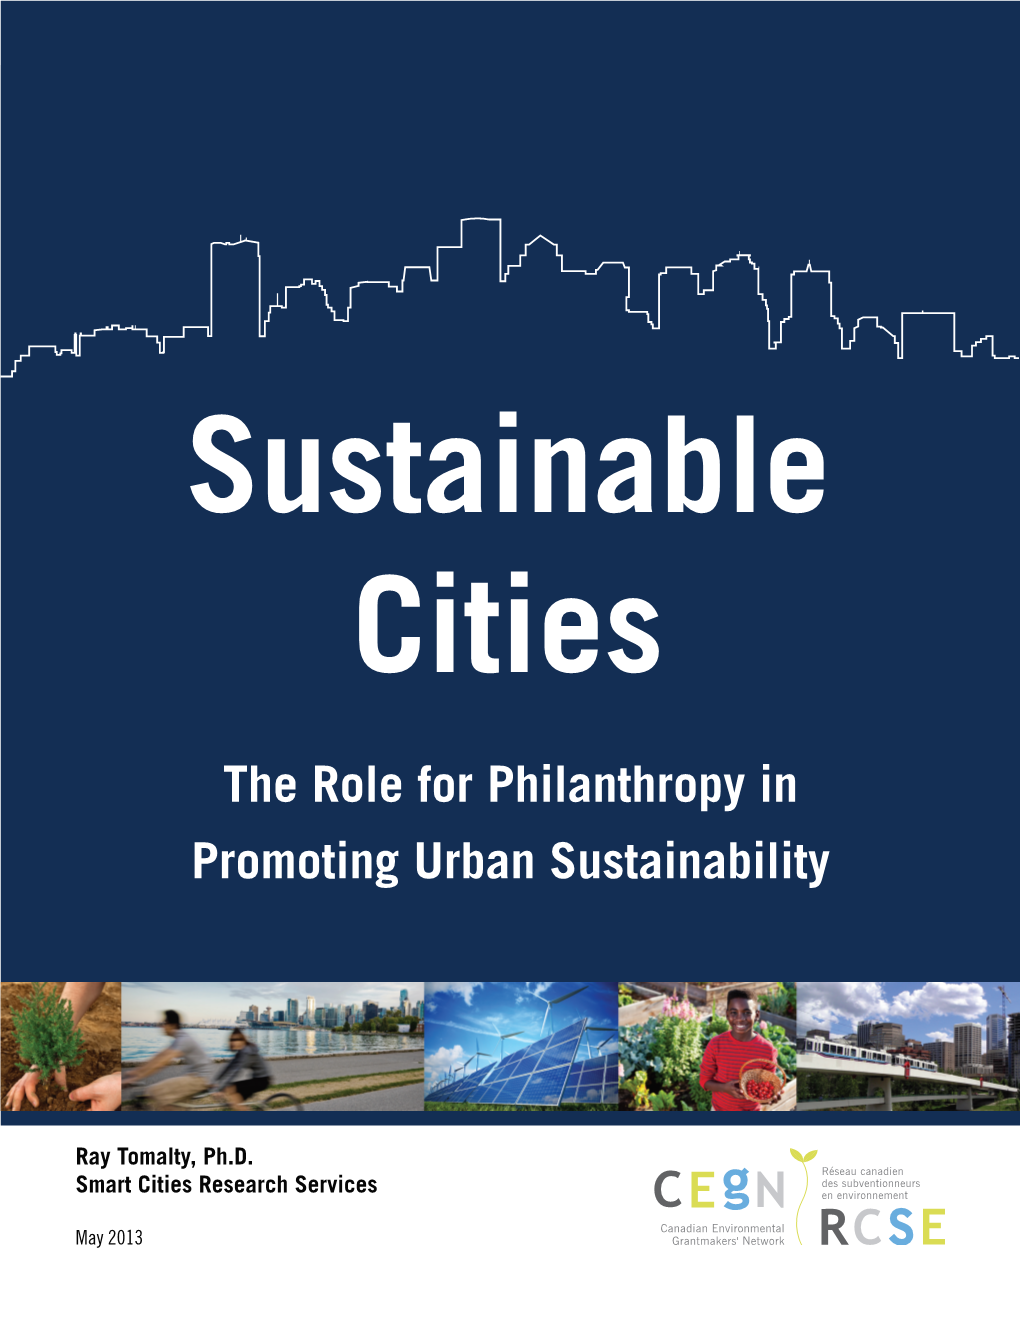 The Role for Philanthropy in Promoting Urban Sustainability